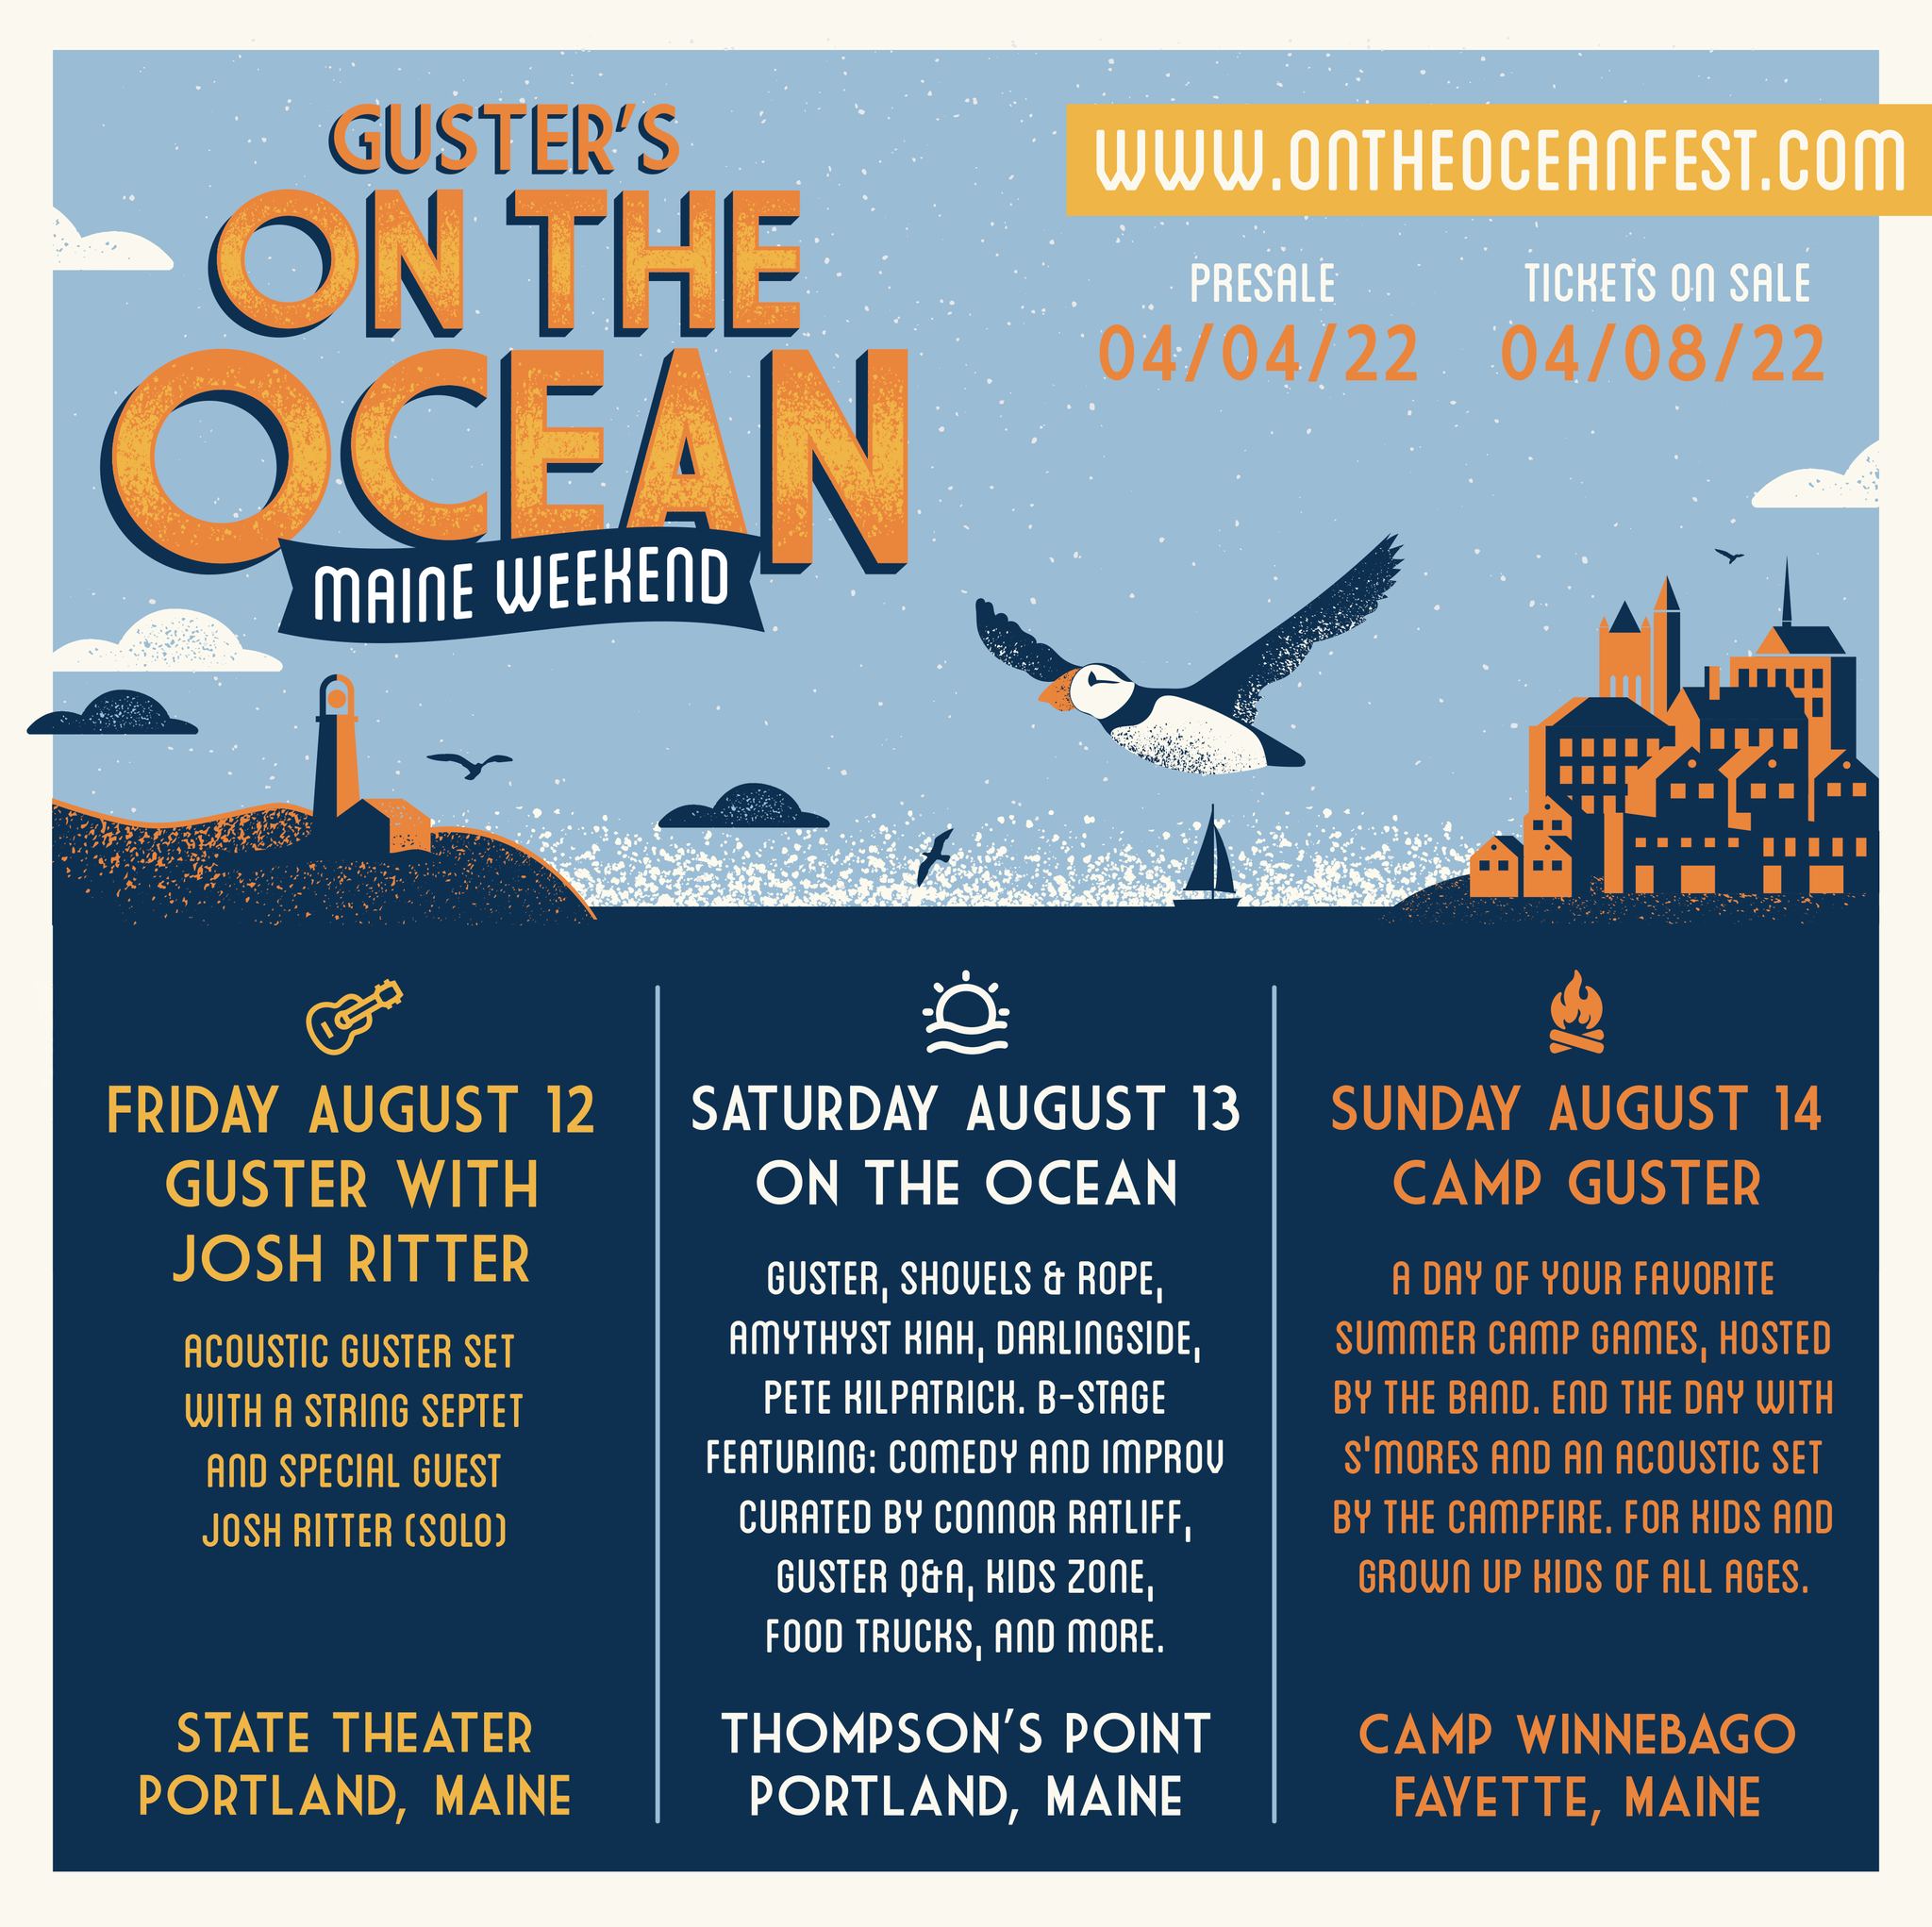 Guster’s On The Ocean Weekend Returns To Portland, Maine August 12 14